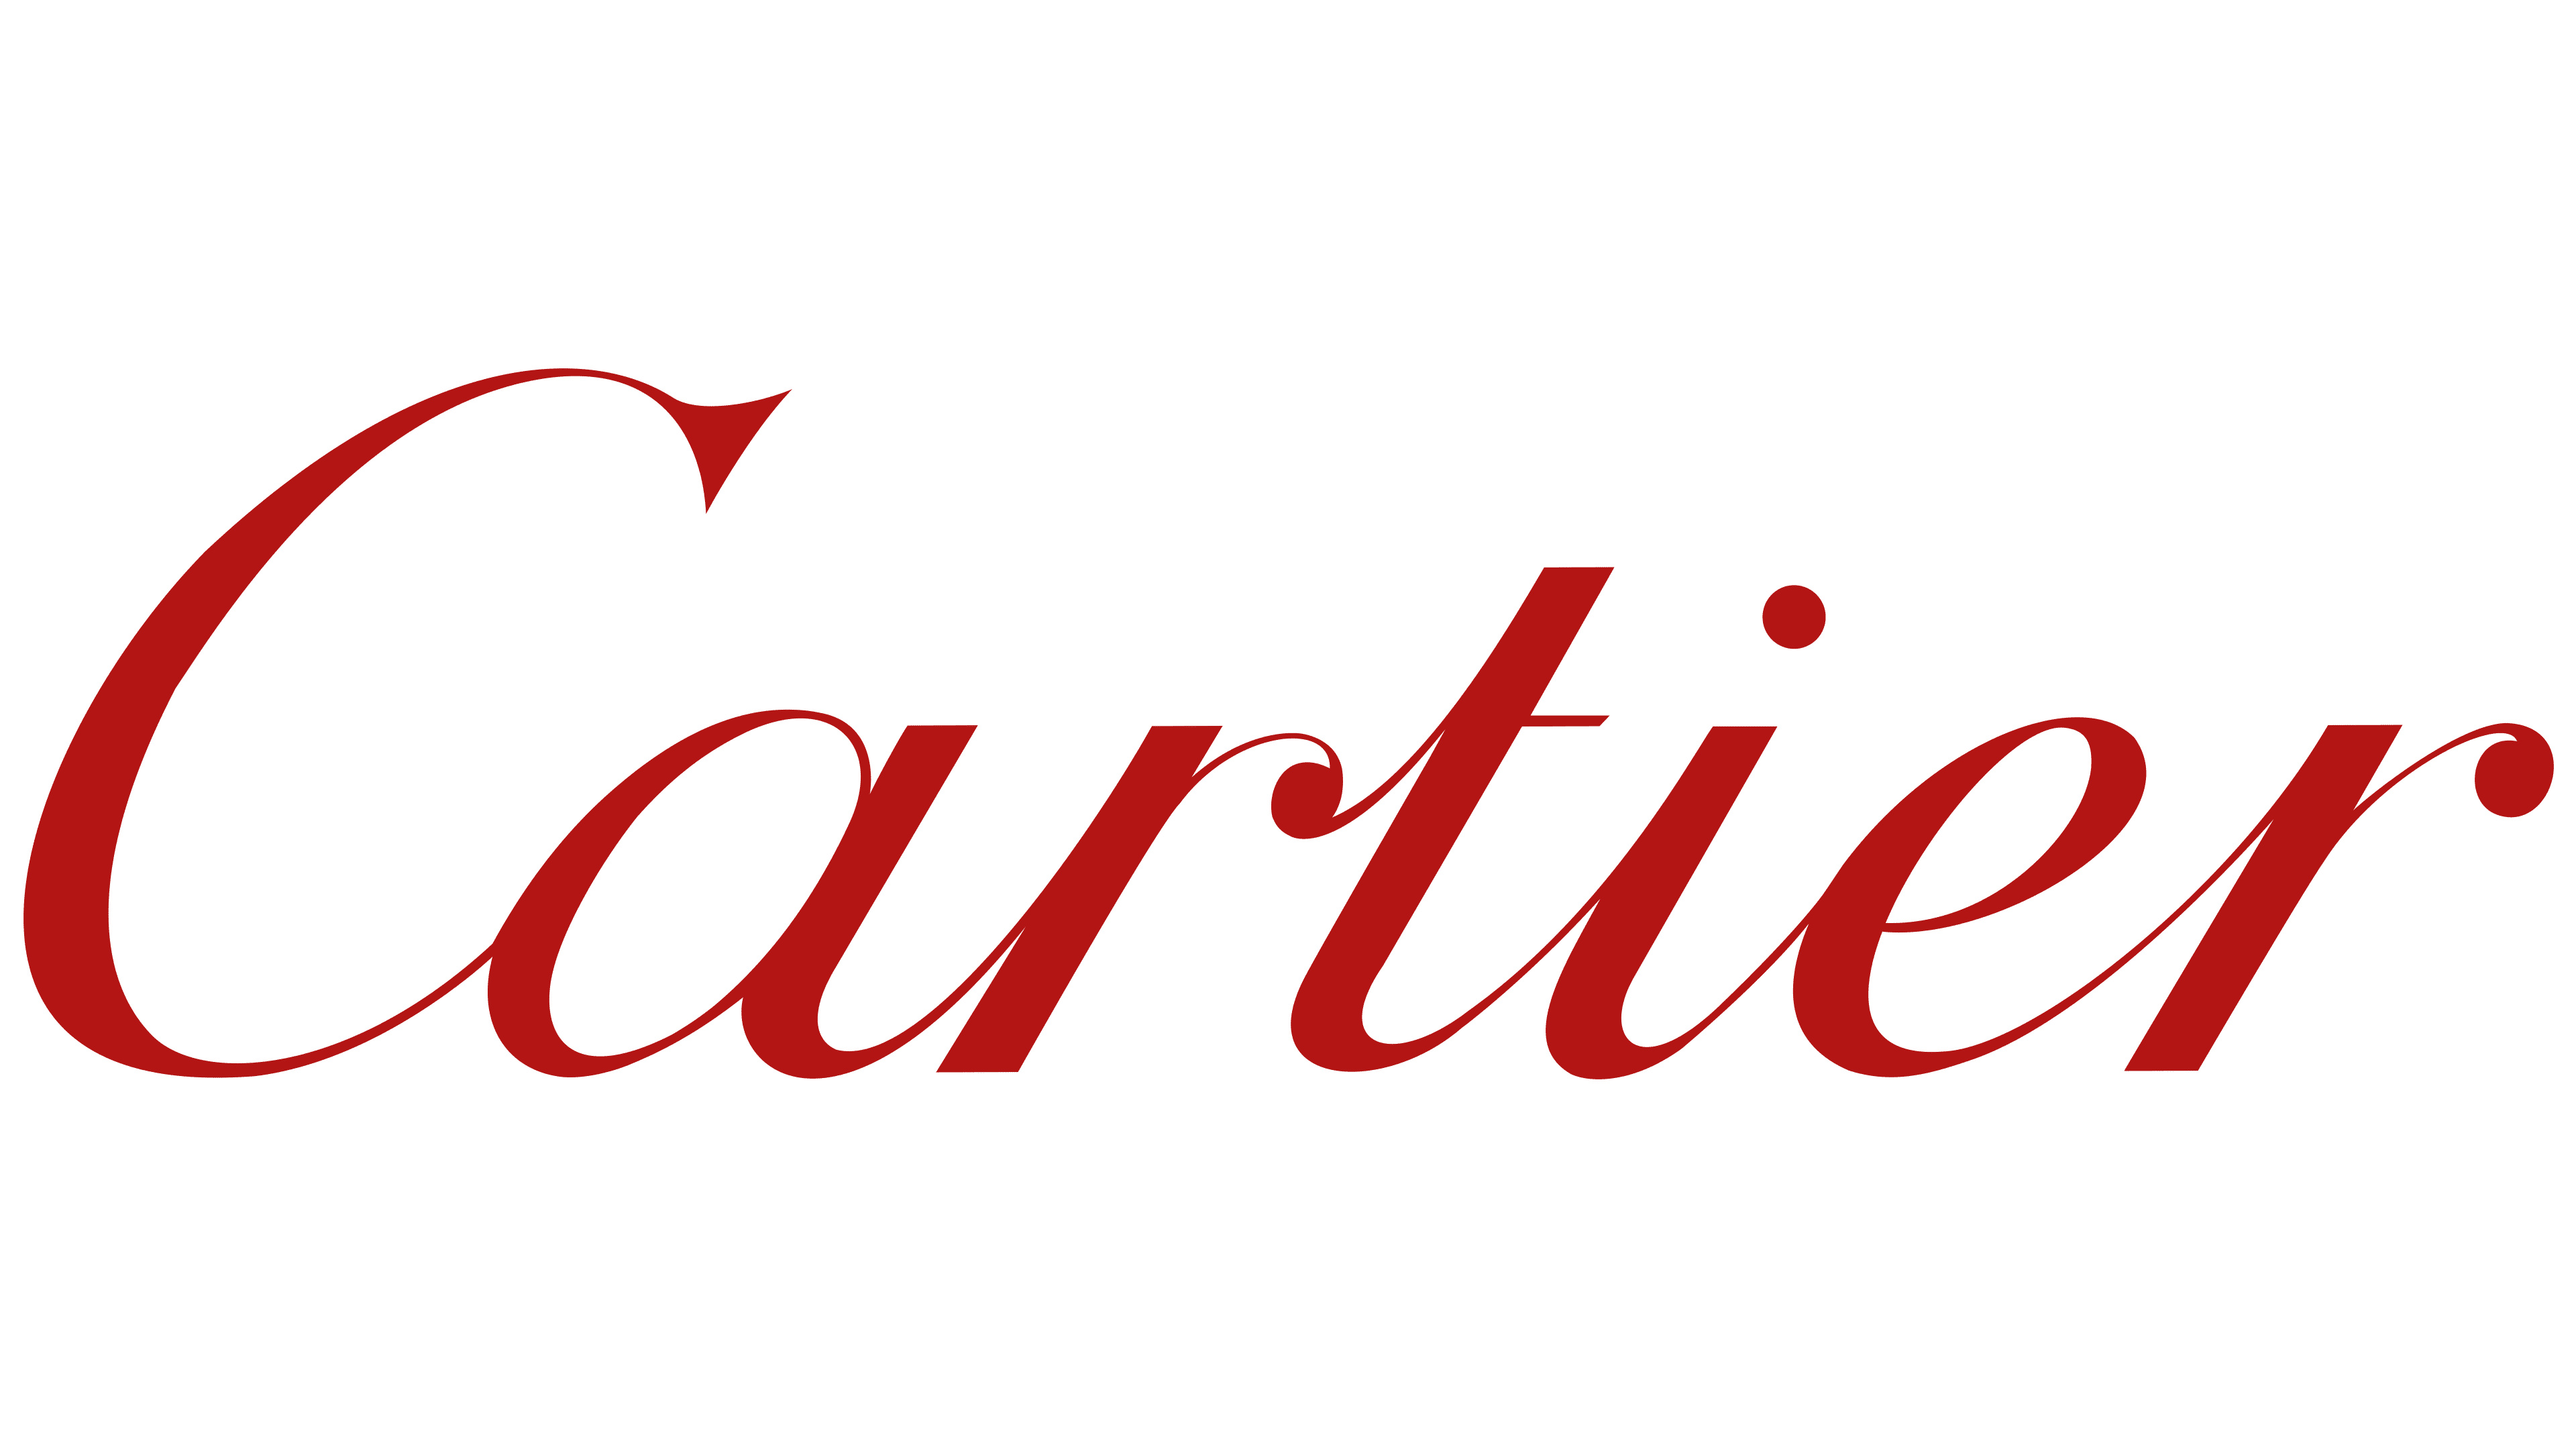 Cartier: A French luxury goods brand that designs and manufactures high-end watches and jewelry. 3840x2160 4K Wallpaper.